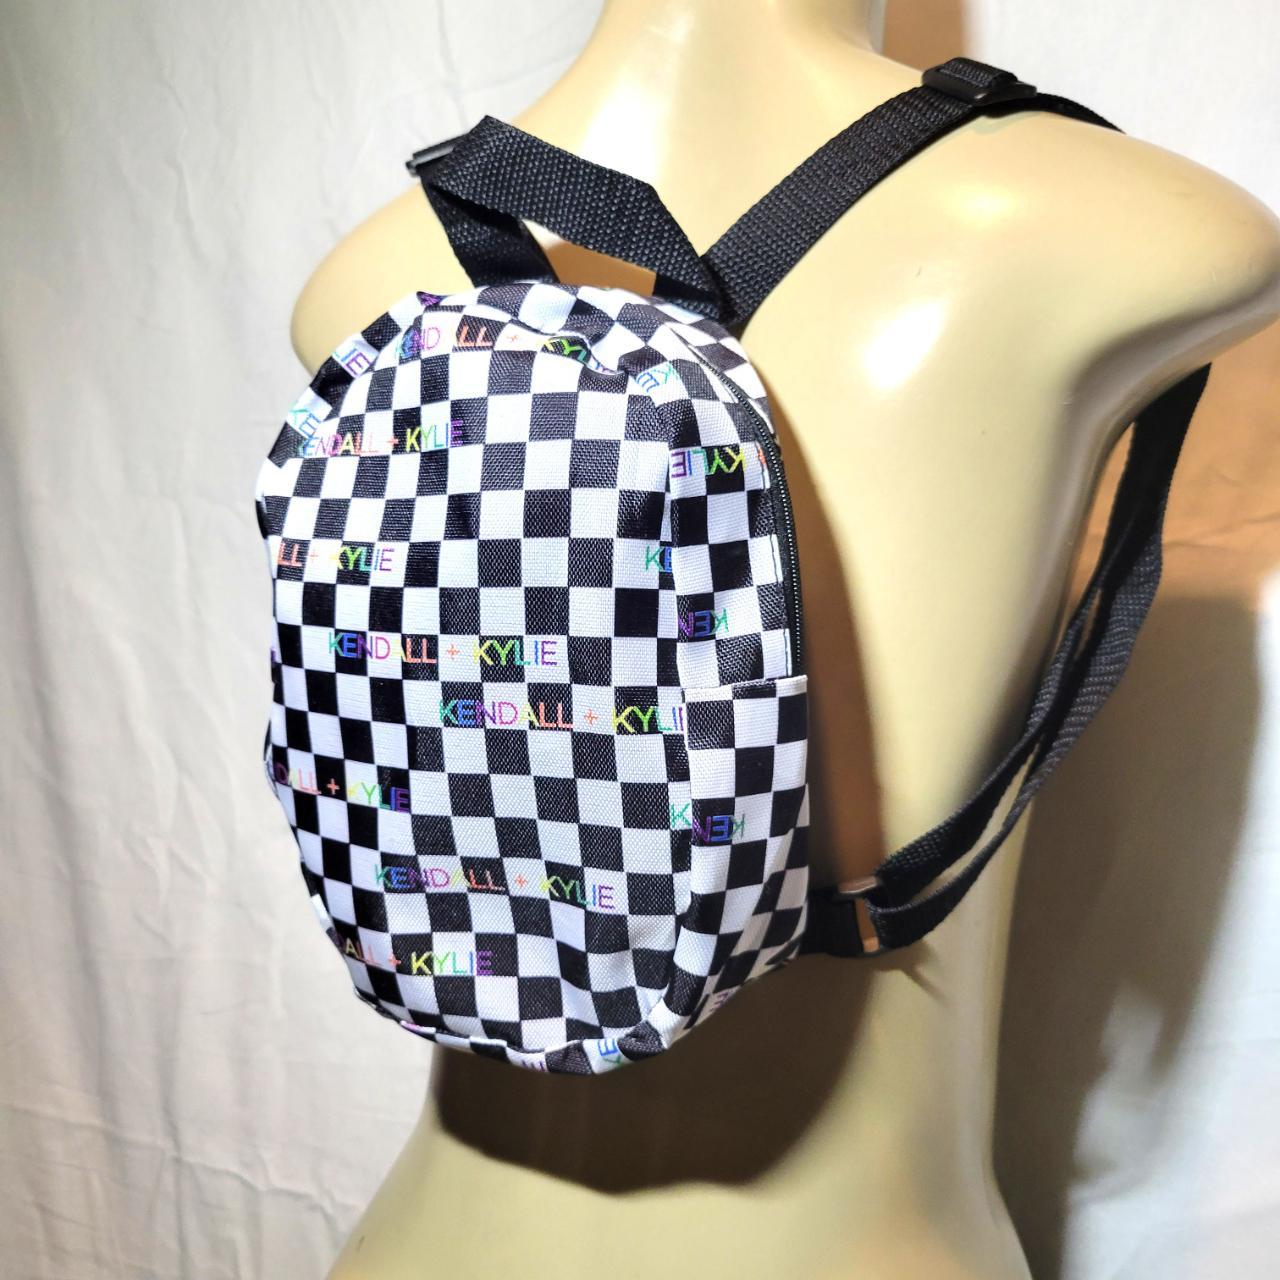 KENDALL + KYLIE Mini Backpack Purse Checkered/Gingham Pattern